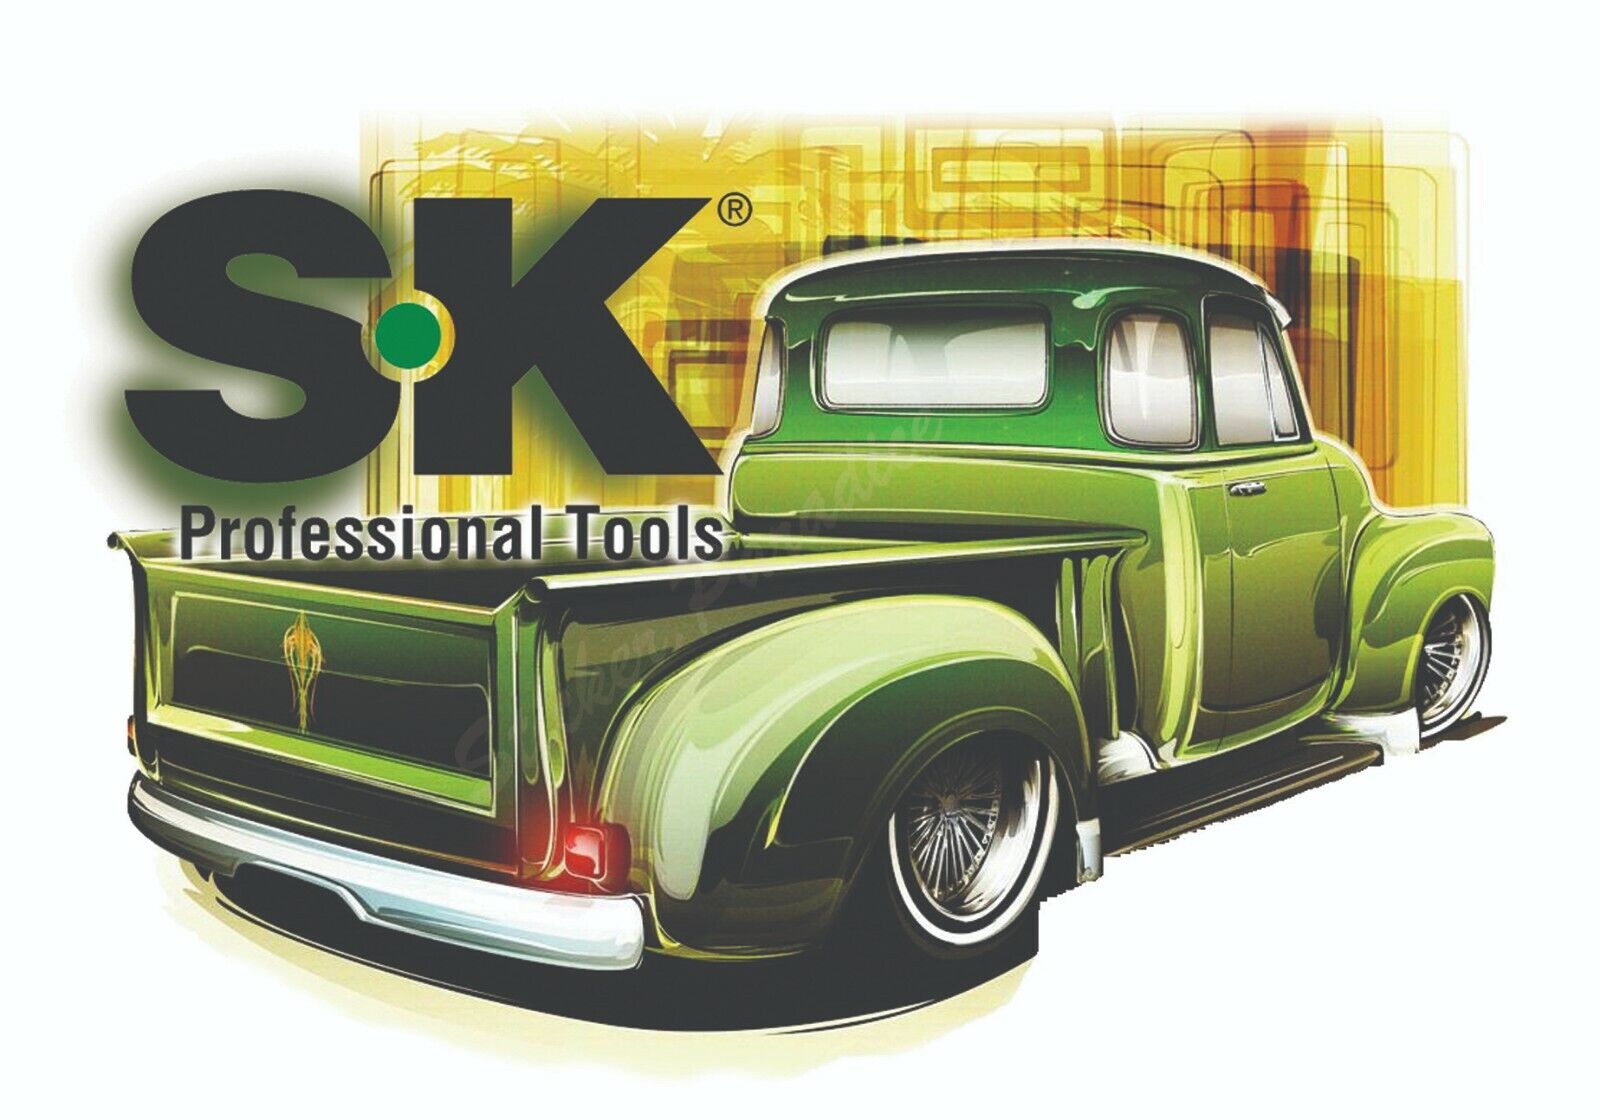 SK Professional Tools Sticker Sunset Dreams Tool Box Mechanic Decal Made in USA 